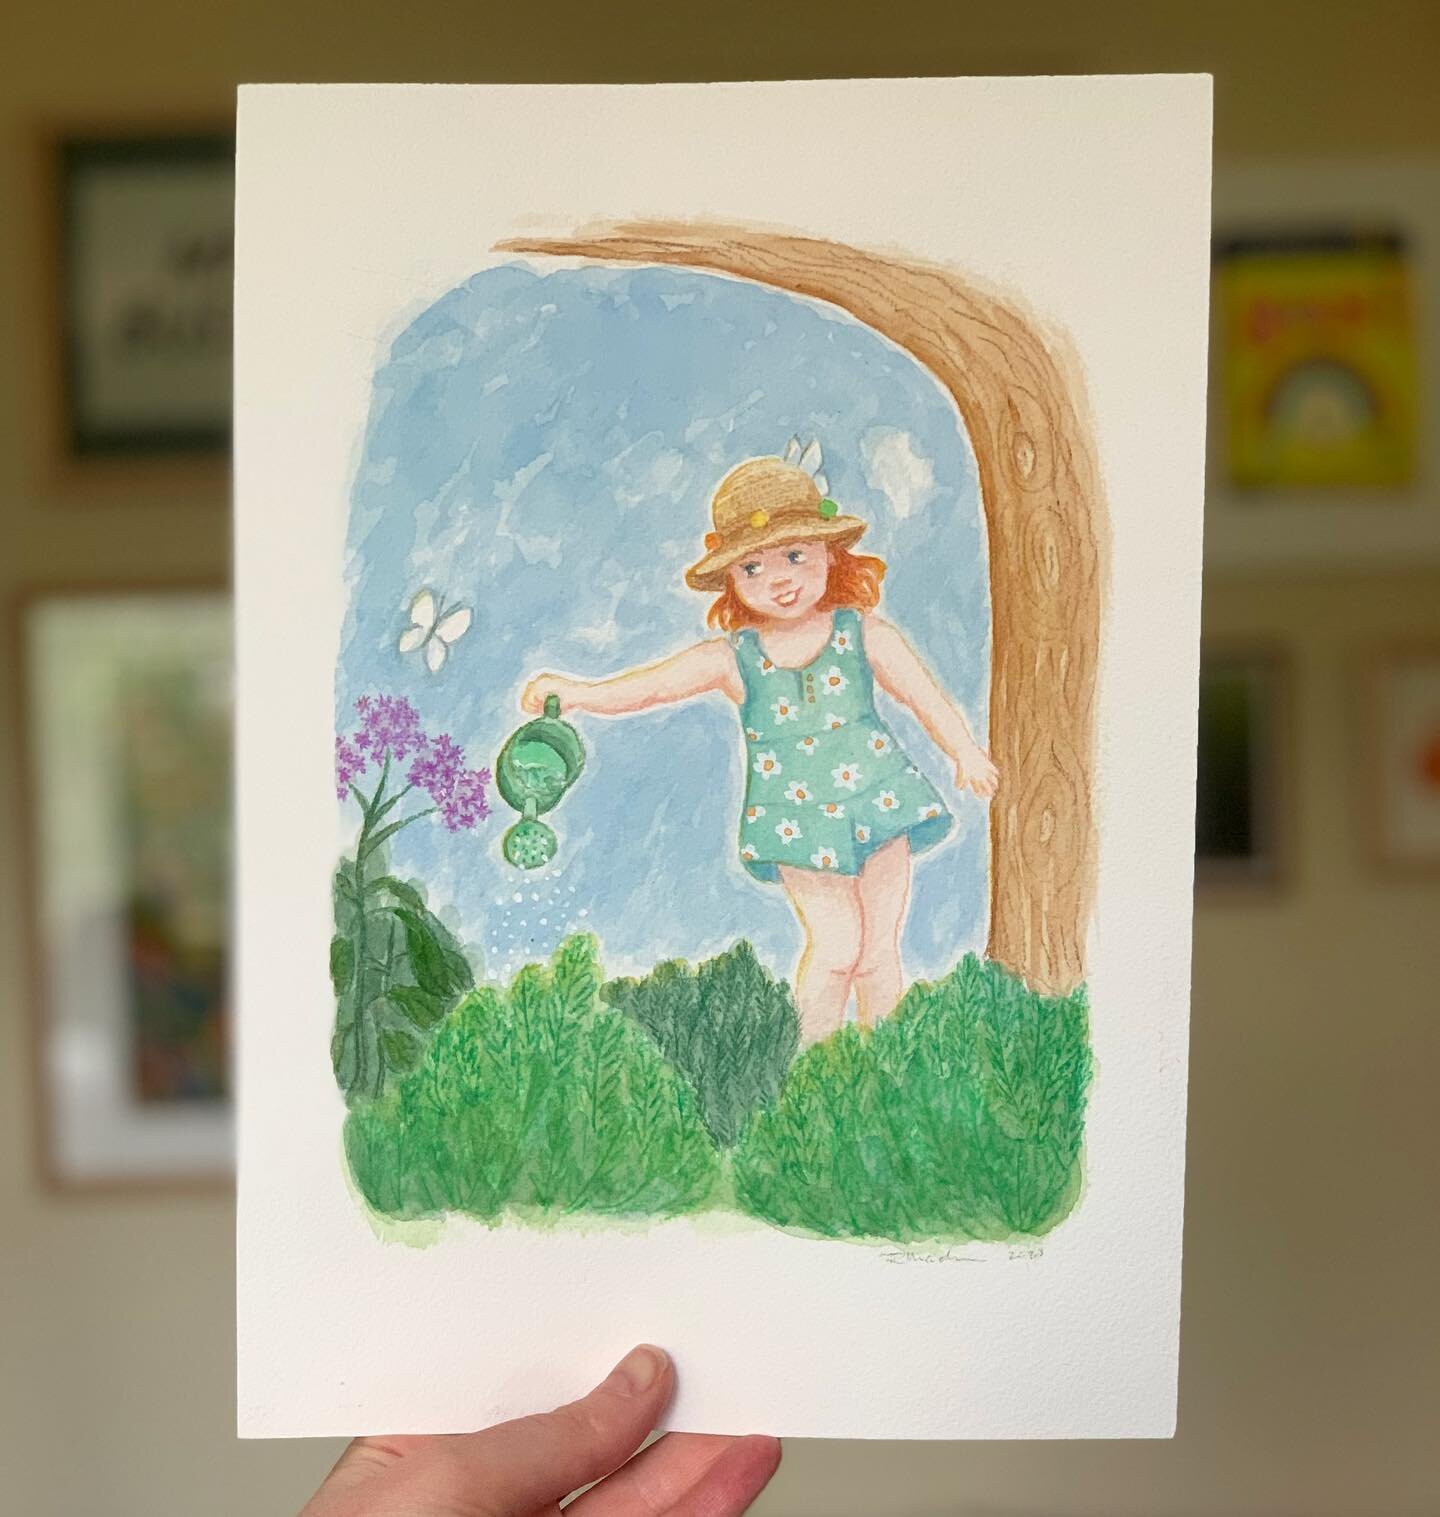 Happy 3rd Birthday to my youngest niece Esme!
Here&rsquo;s a little painting I did of her watering the garden that I&rsquo;m going to gift her. 
I am a bit worried that having this picture is only going to increase her obsession with watering/water p